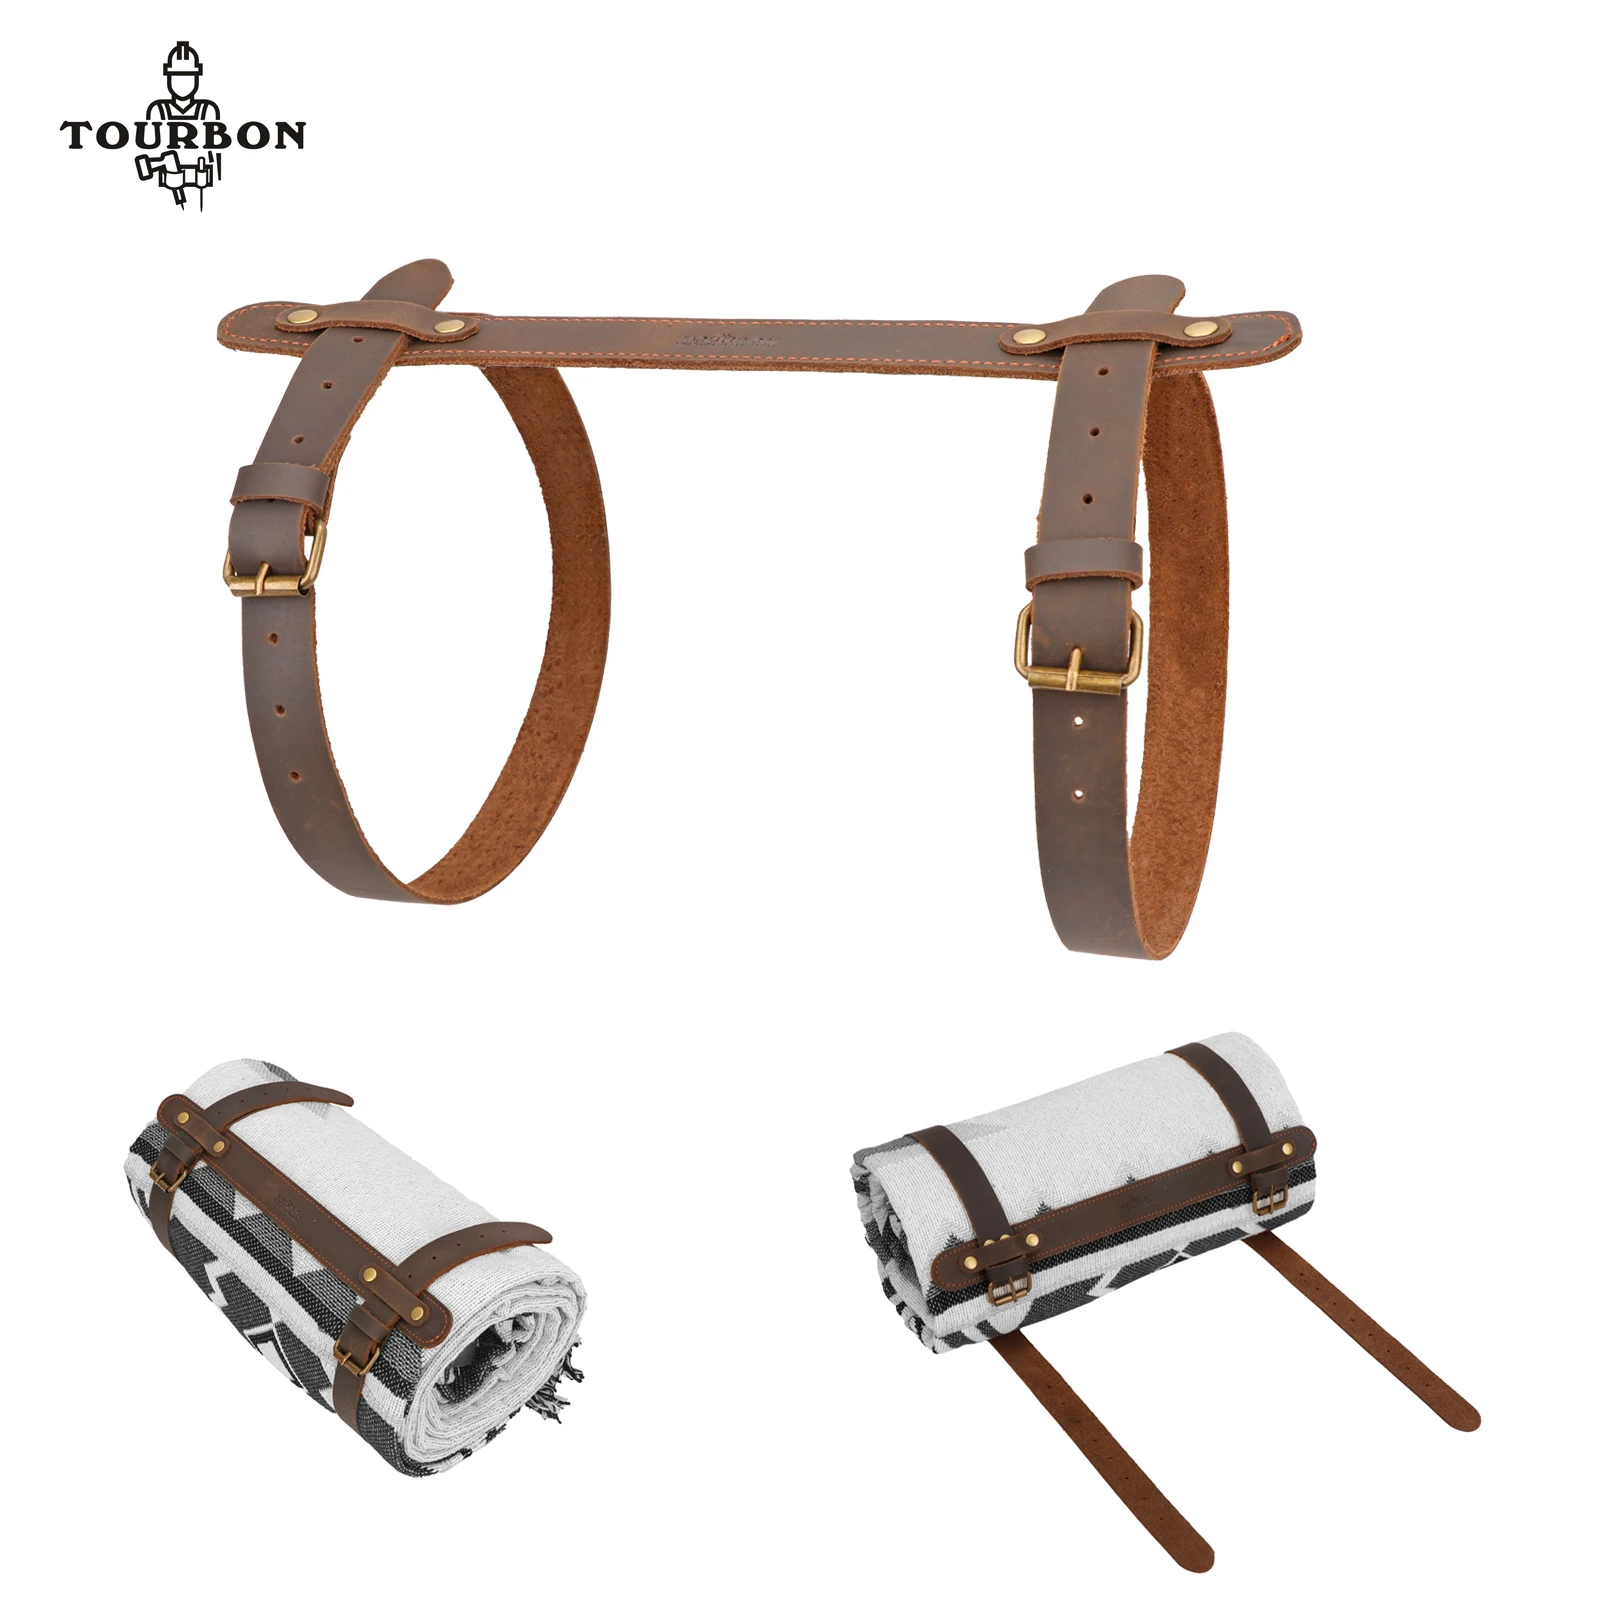 Tourbon Leather Picnic Mat Blanket Strap Cargo Strap Travel Tied Cargo Luggage Tool Strap Outdoor Camping